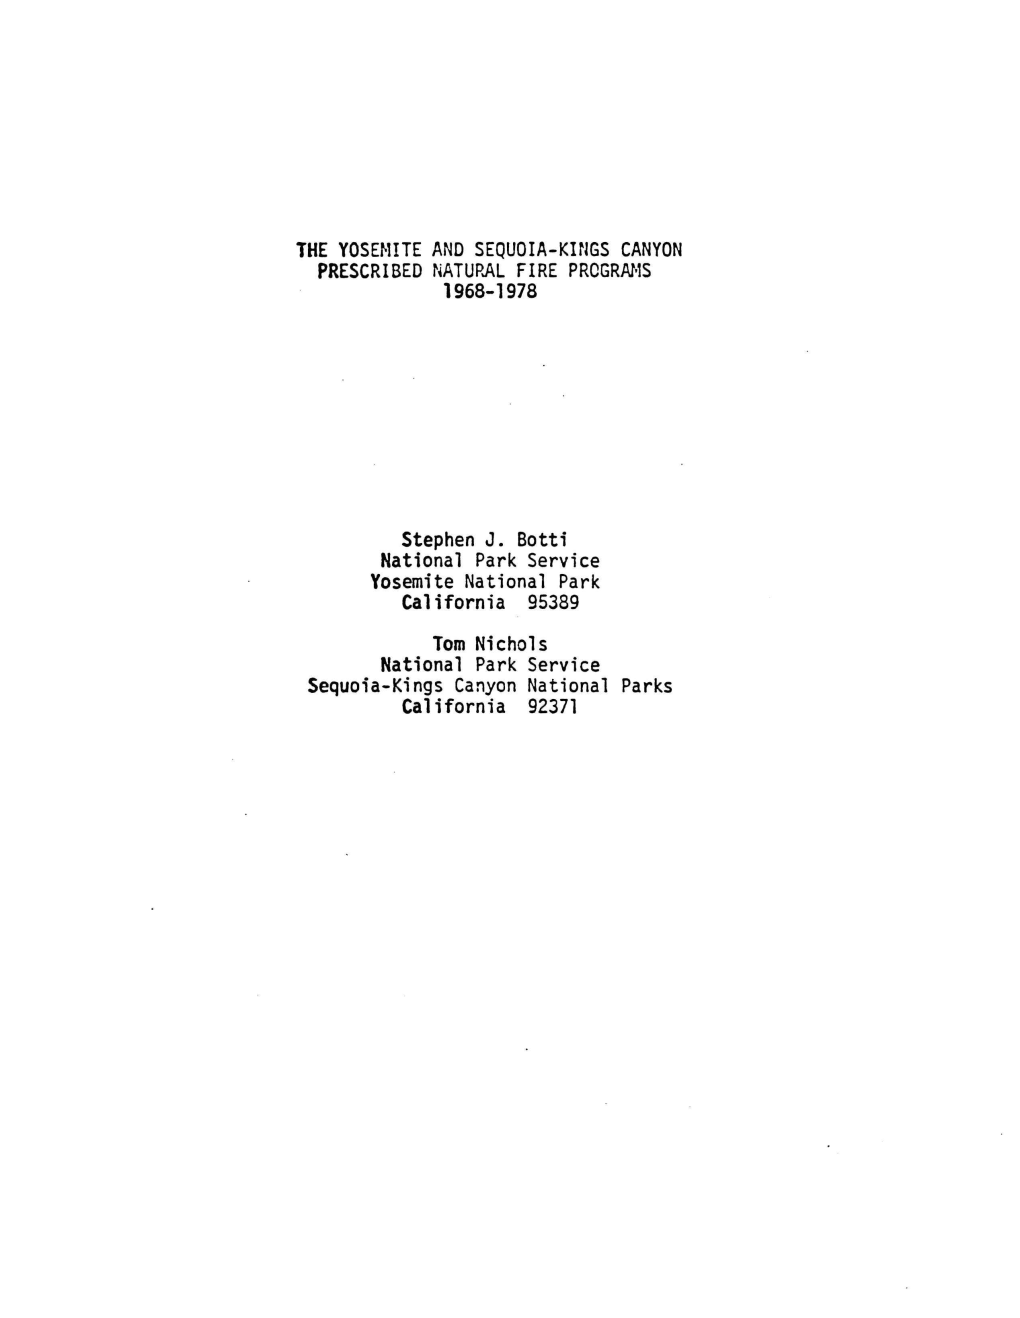 The Yosemite and Sequoia-Kings Canyon Prescribed Natural Fire Programs 1968-1978